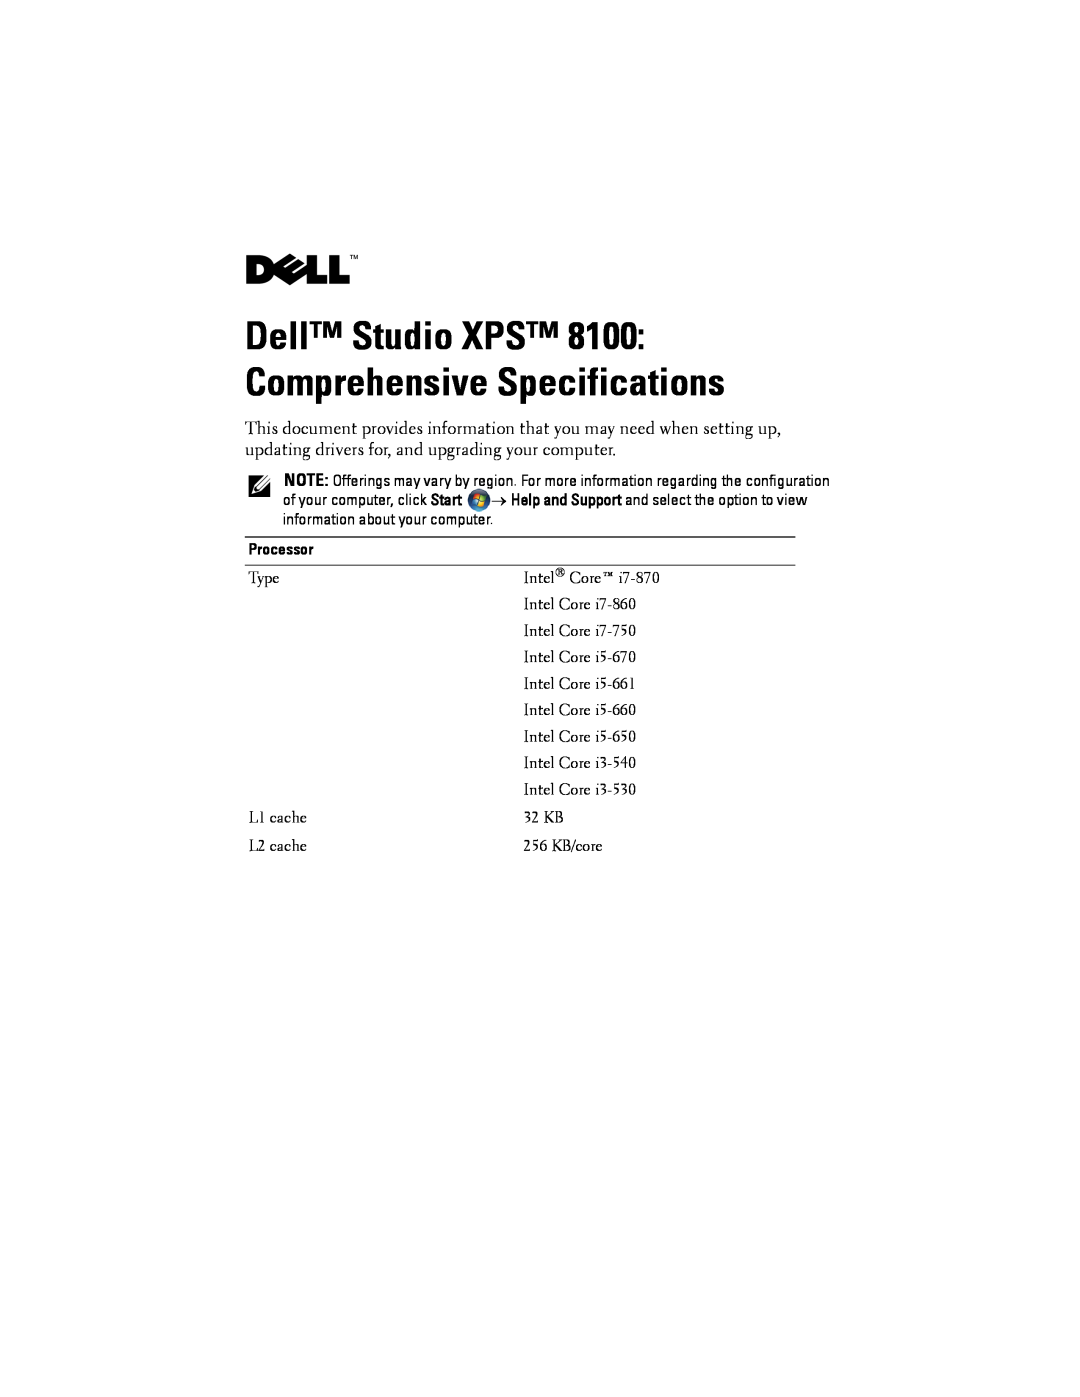 Dell XPSTM 8100 specifications Processor, Dell Studio XPS 8100 Comprehensive Specifications 